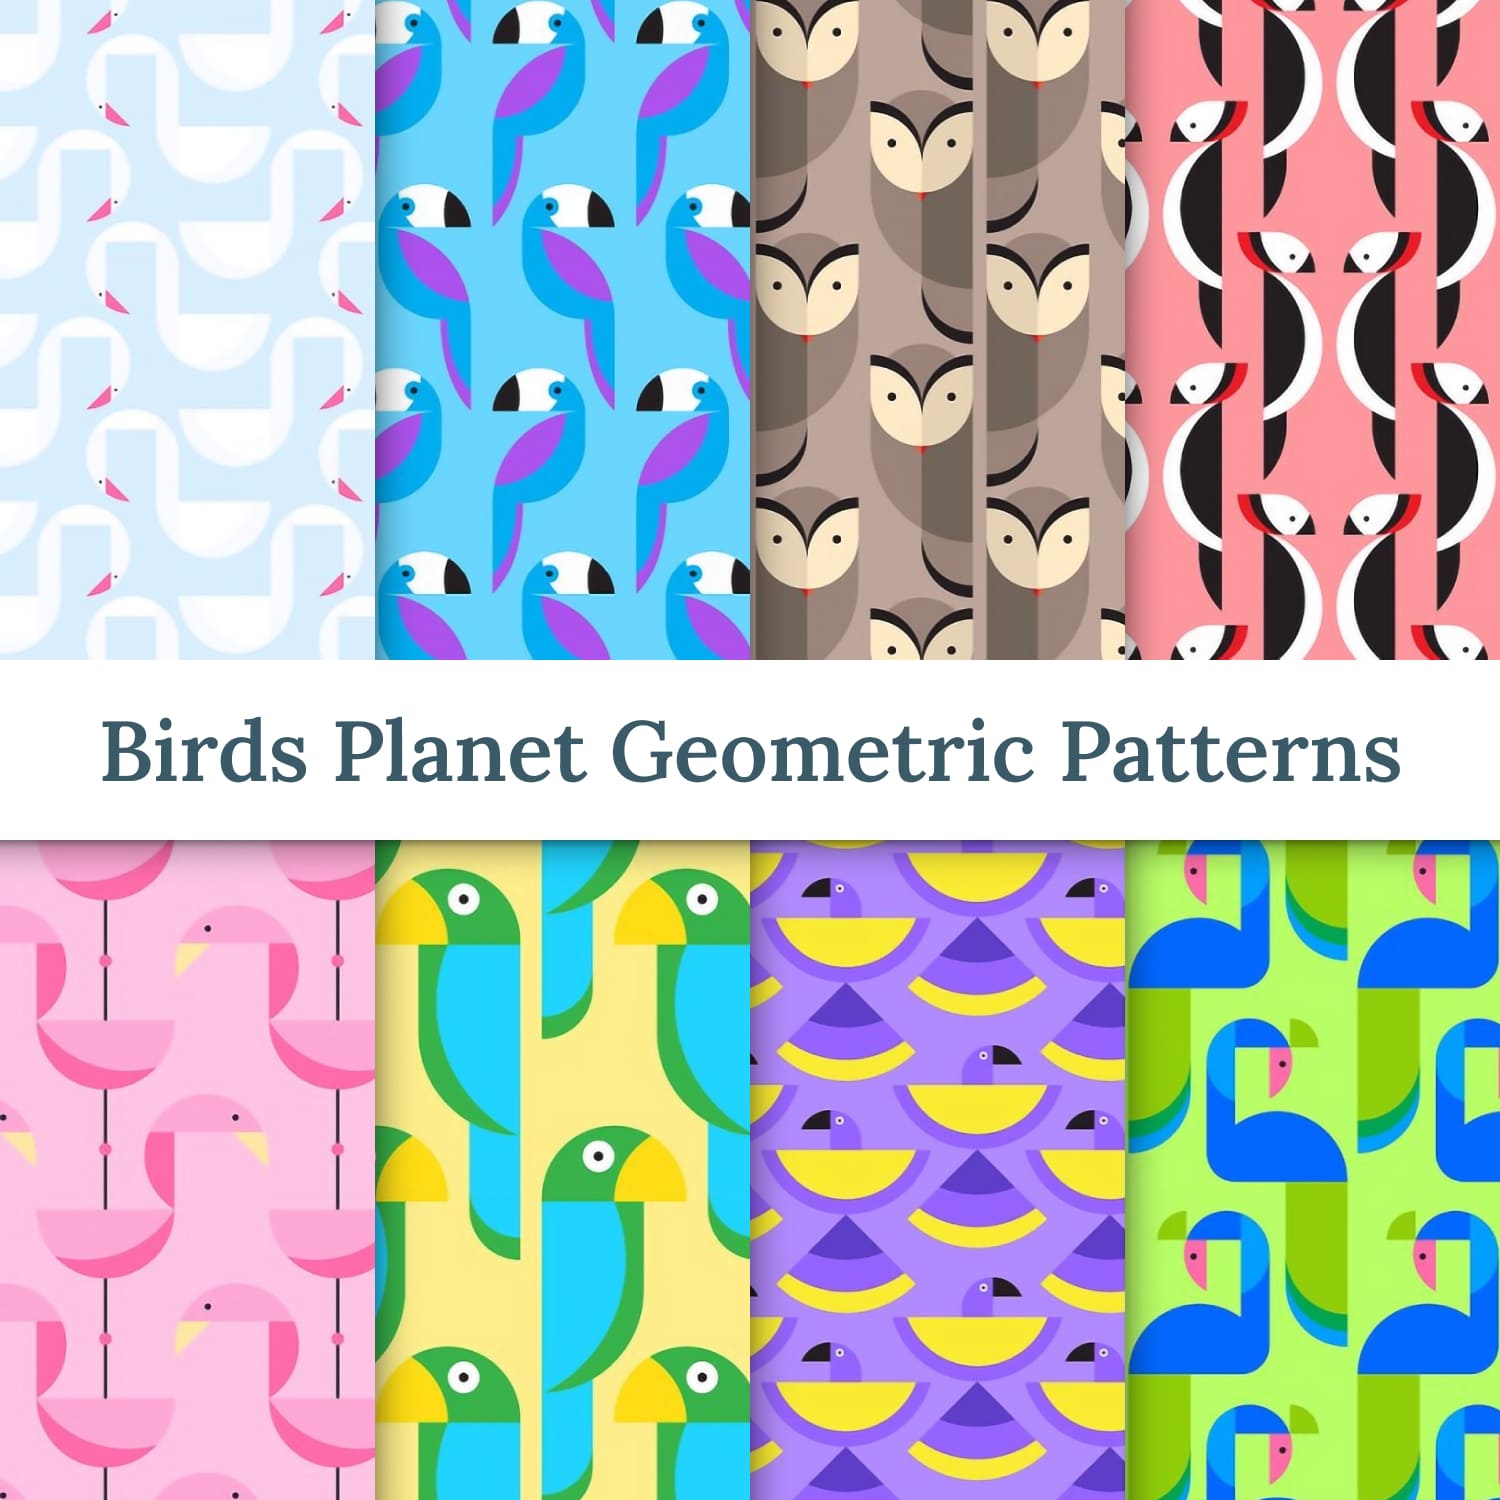 Birds Planet Geometric Patterns - main image preview.